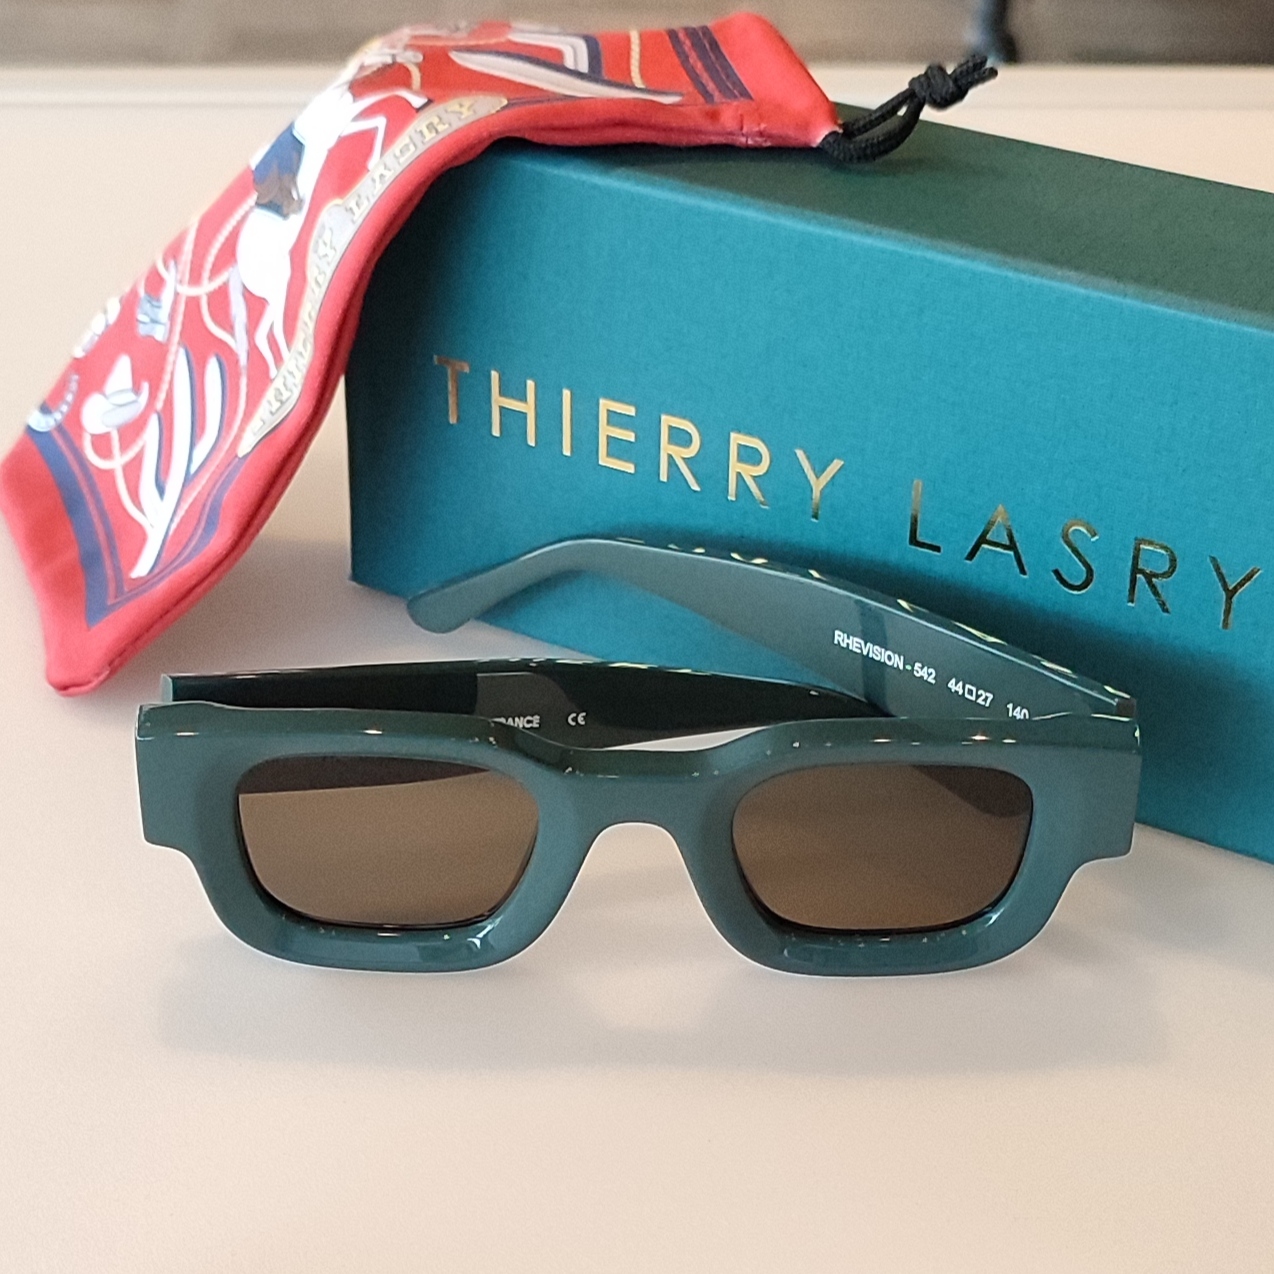 Theirry Lasry Rhevision frame in colour 542